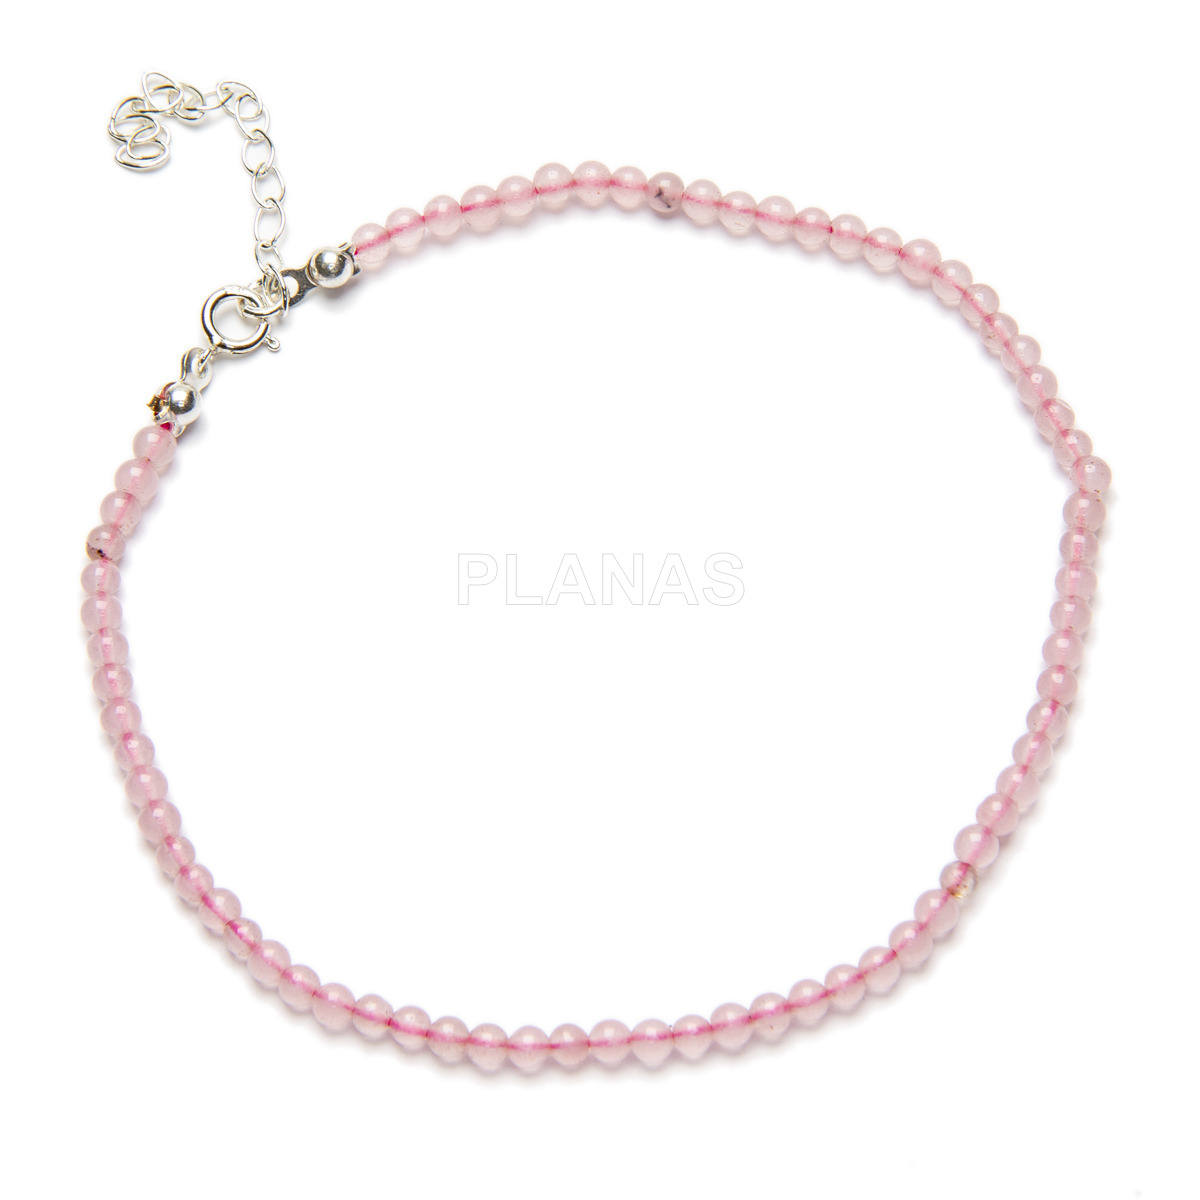 Anklet in sterling silver and pink quartz.